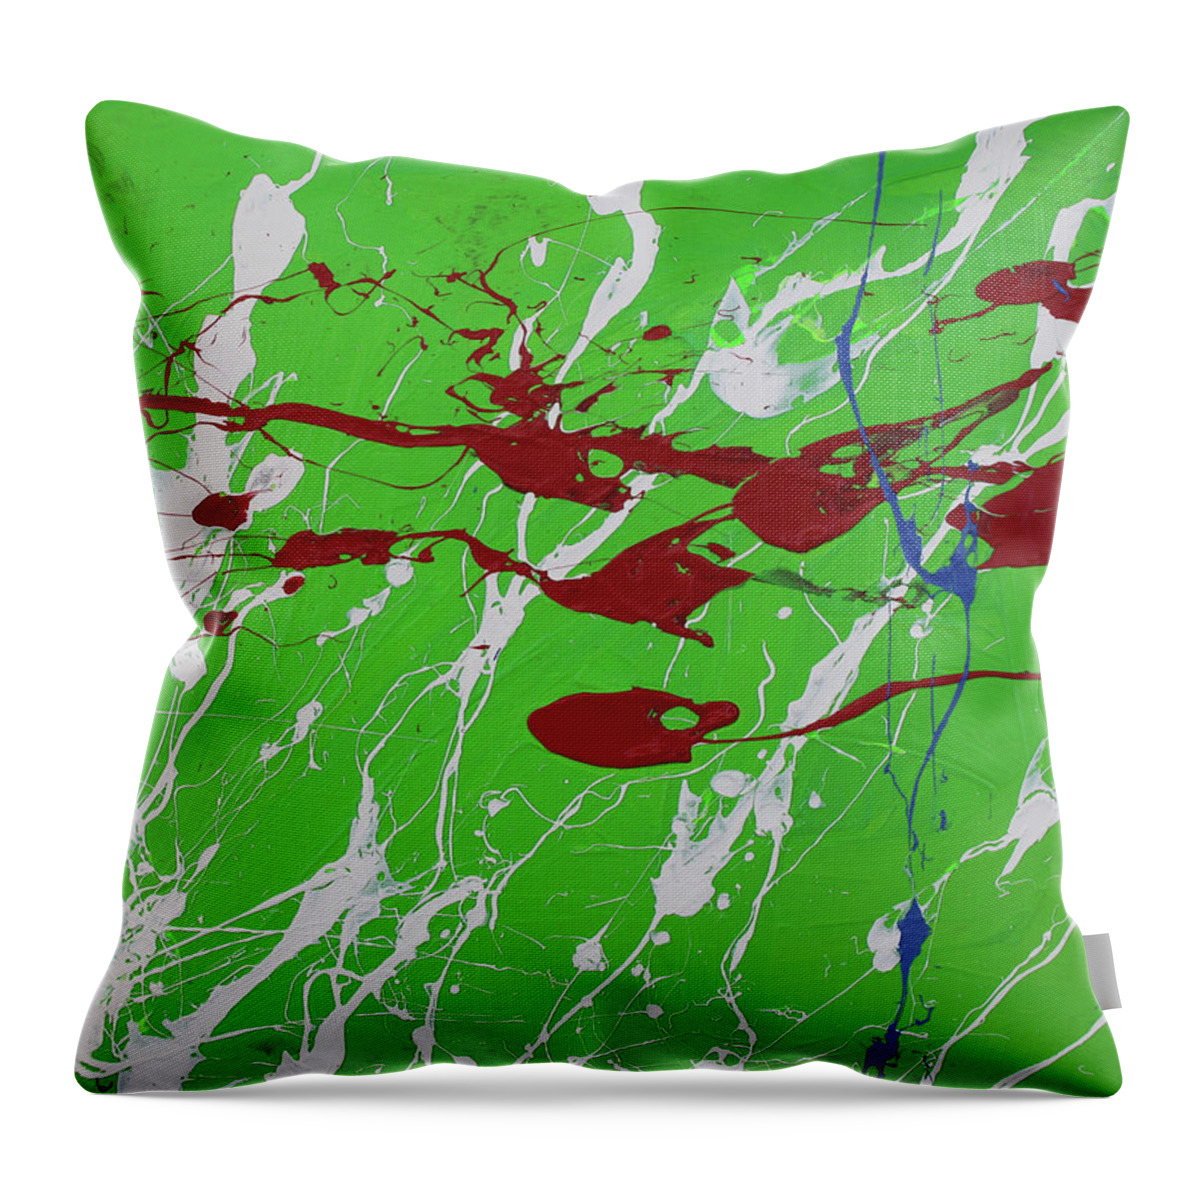  Throw Pillow featuring the painting Ventus by Embrace The Matrix